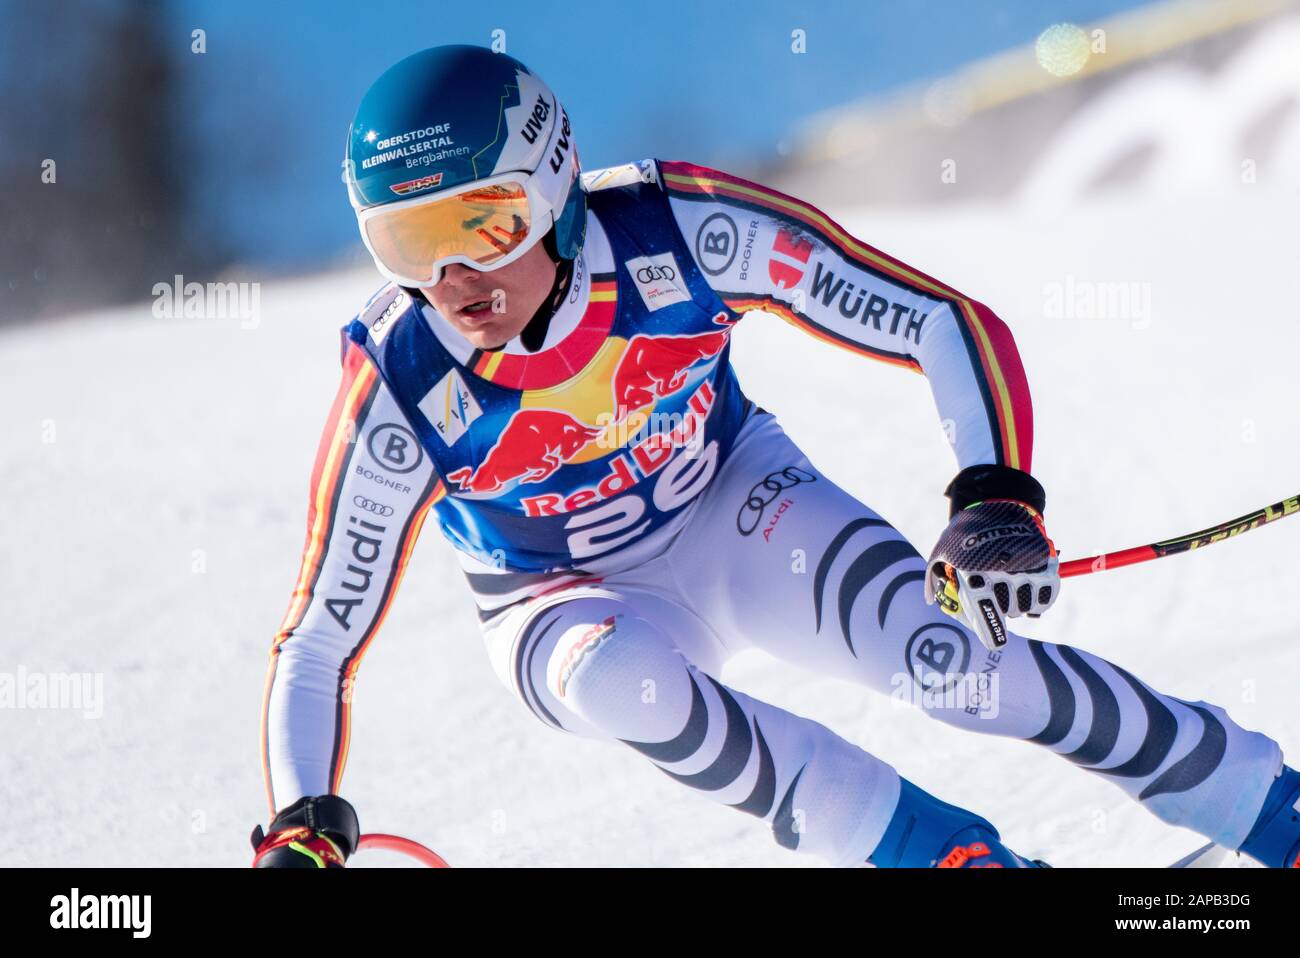 Manuel Schmid of Germany at the Ski Alpin: 80. Hahnenkamm Race 2020 - Audi FIS Alpine Ski World Cup - Men's Downhill Training at the Streif on January 22, 2020 in Kitzbuehel, AUSTRIA. (Photo by Horst Ettensberger/ESPA-Images) Stock Photo